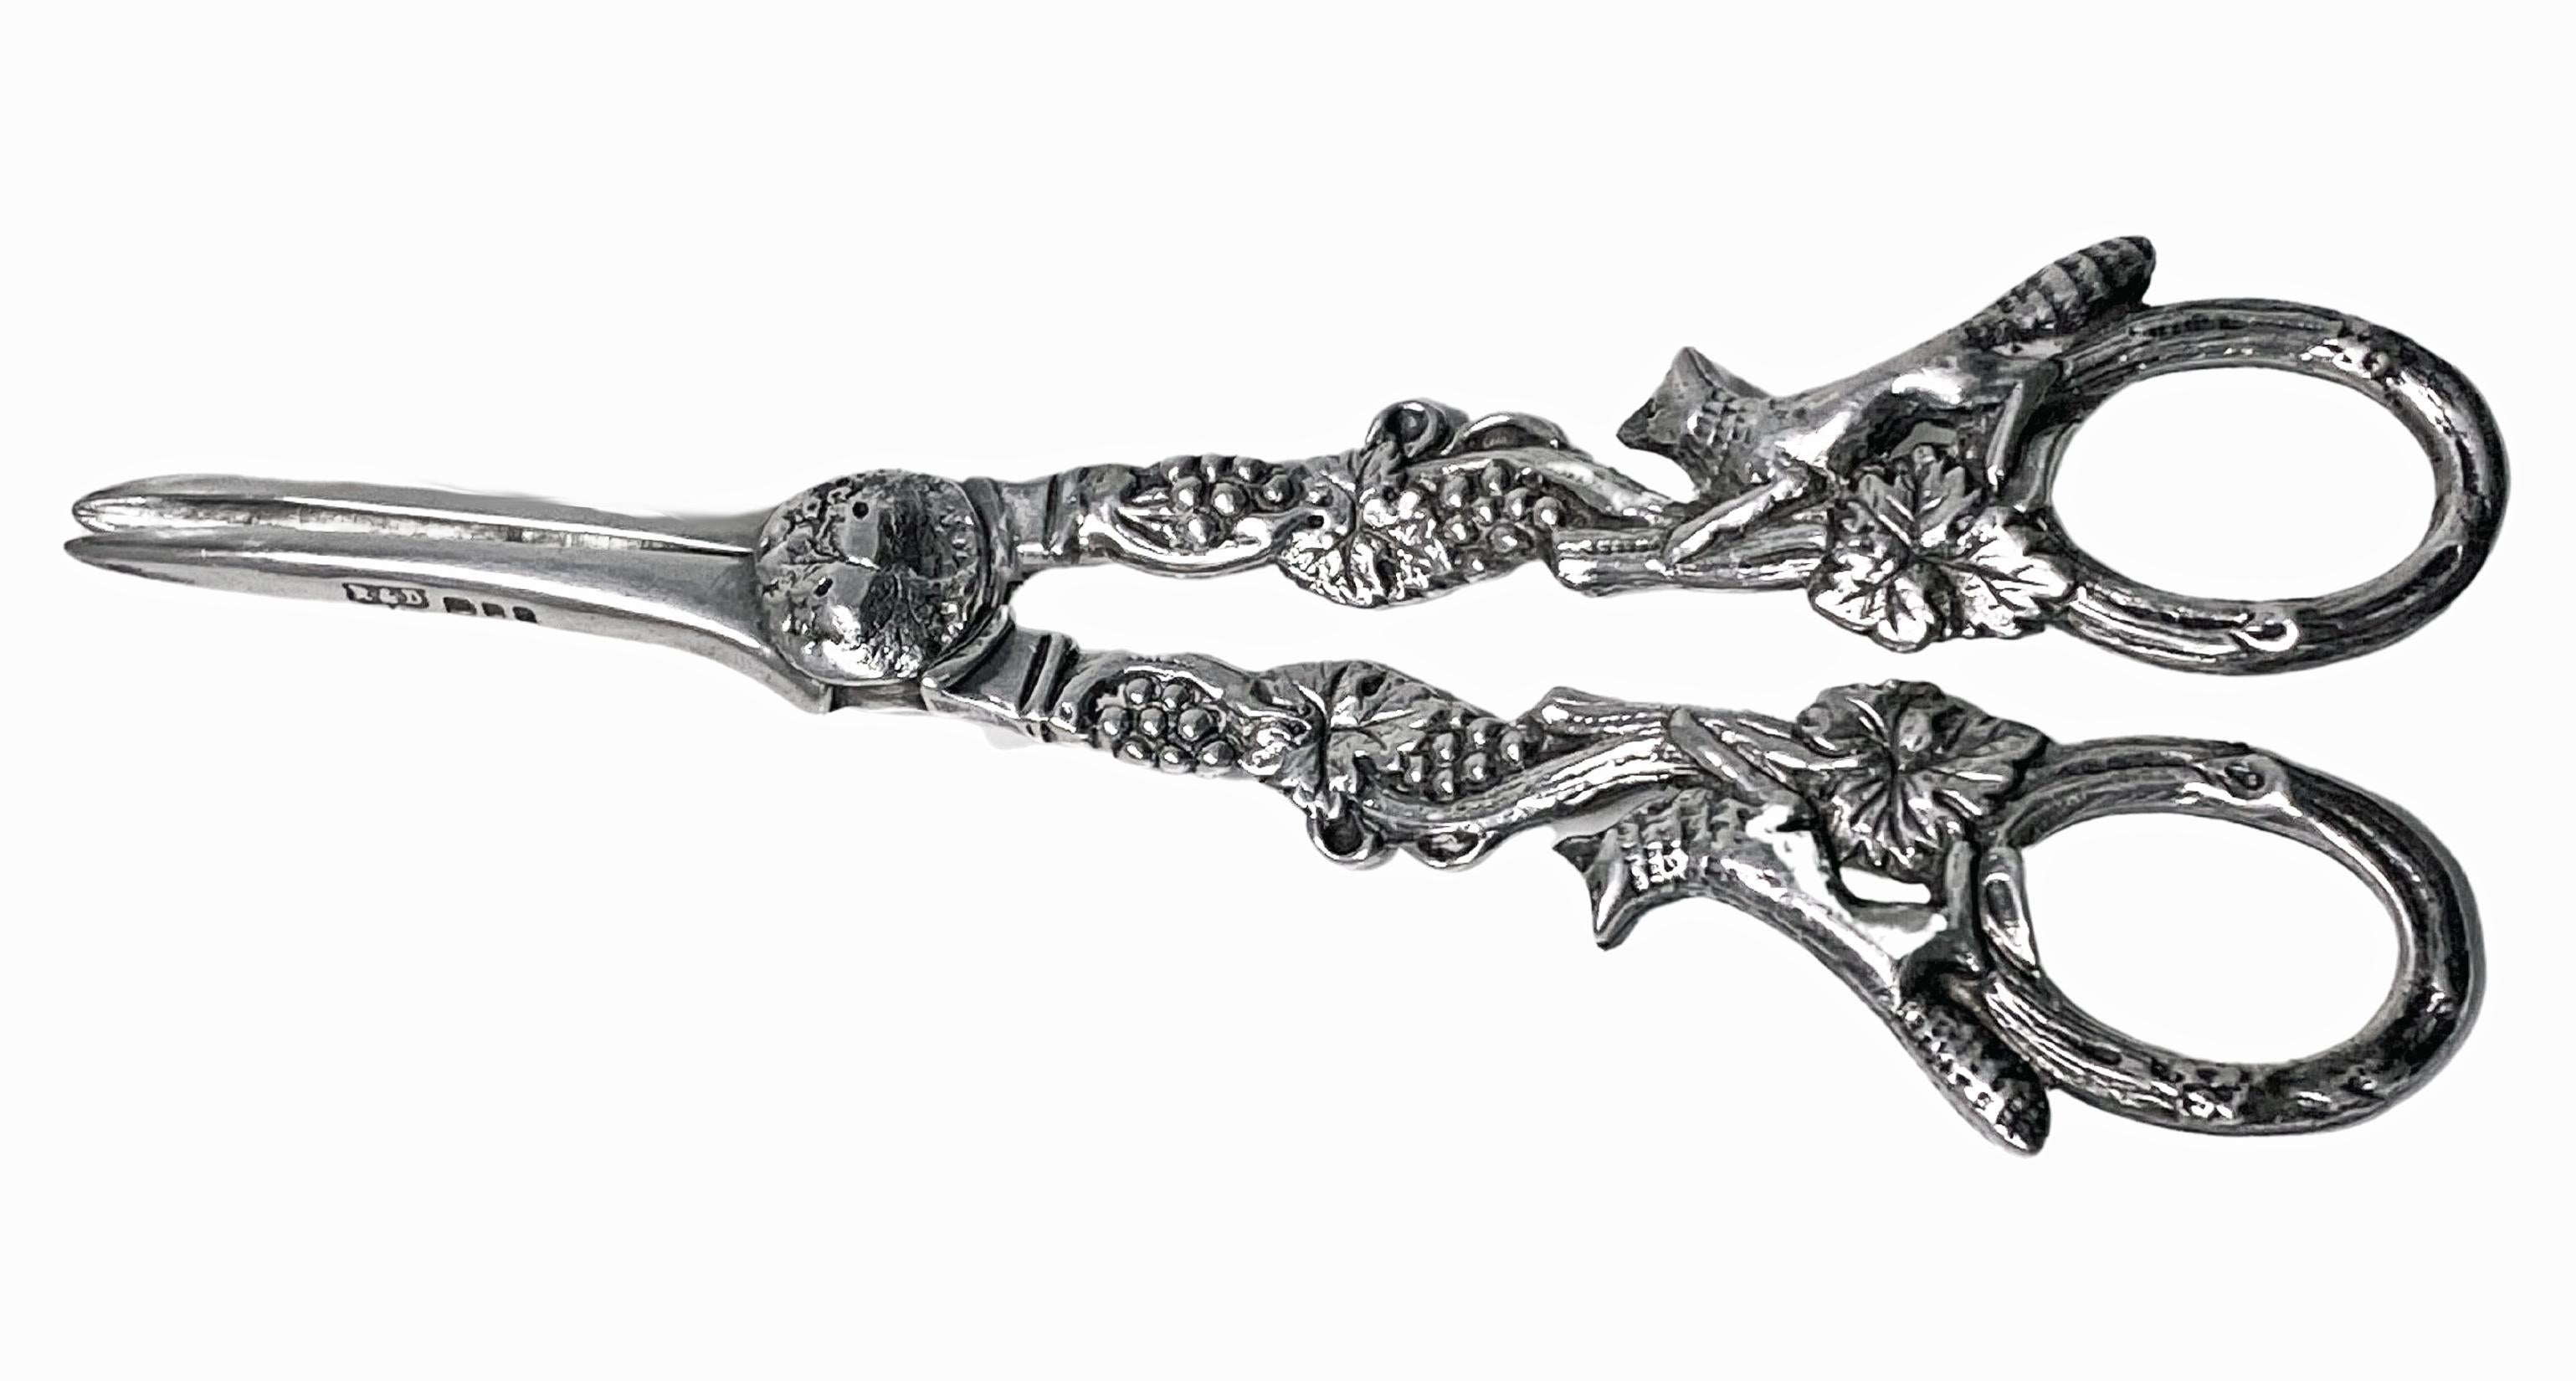 Pair of English Sterling Silver Grape Shears, running foxes design, London 1966, Roberts and Dore. The Shears with running foxes and vine grape design. Full hallmarks and hallmarked on detachable pieces. Length:- 6 1/4 ins; Weight:- 98.65 grams